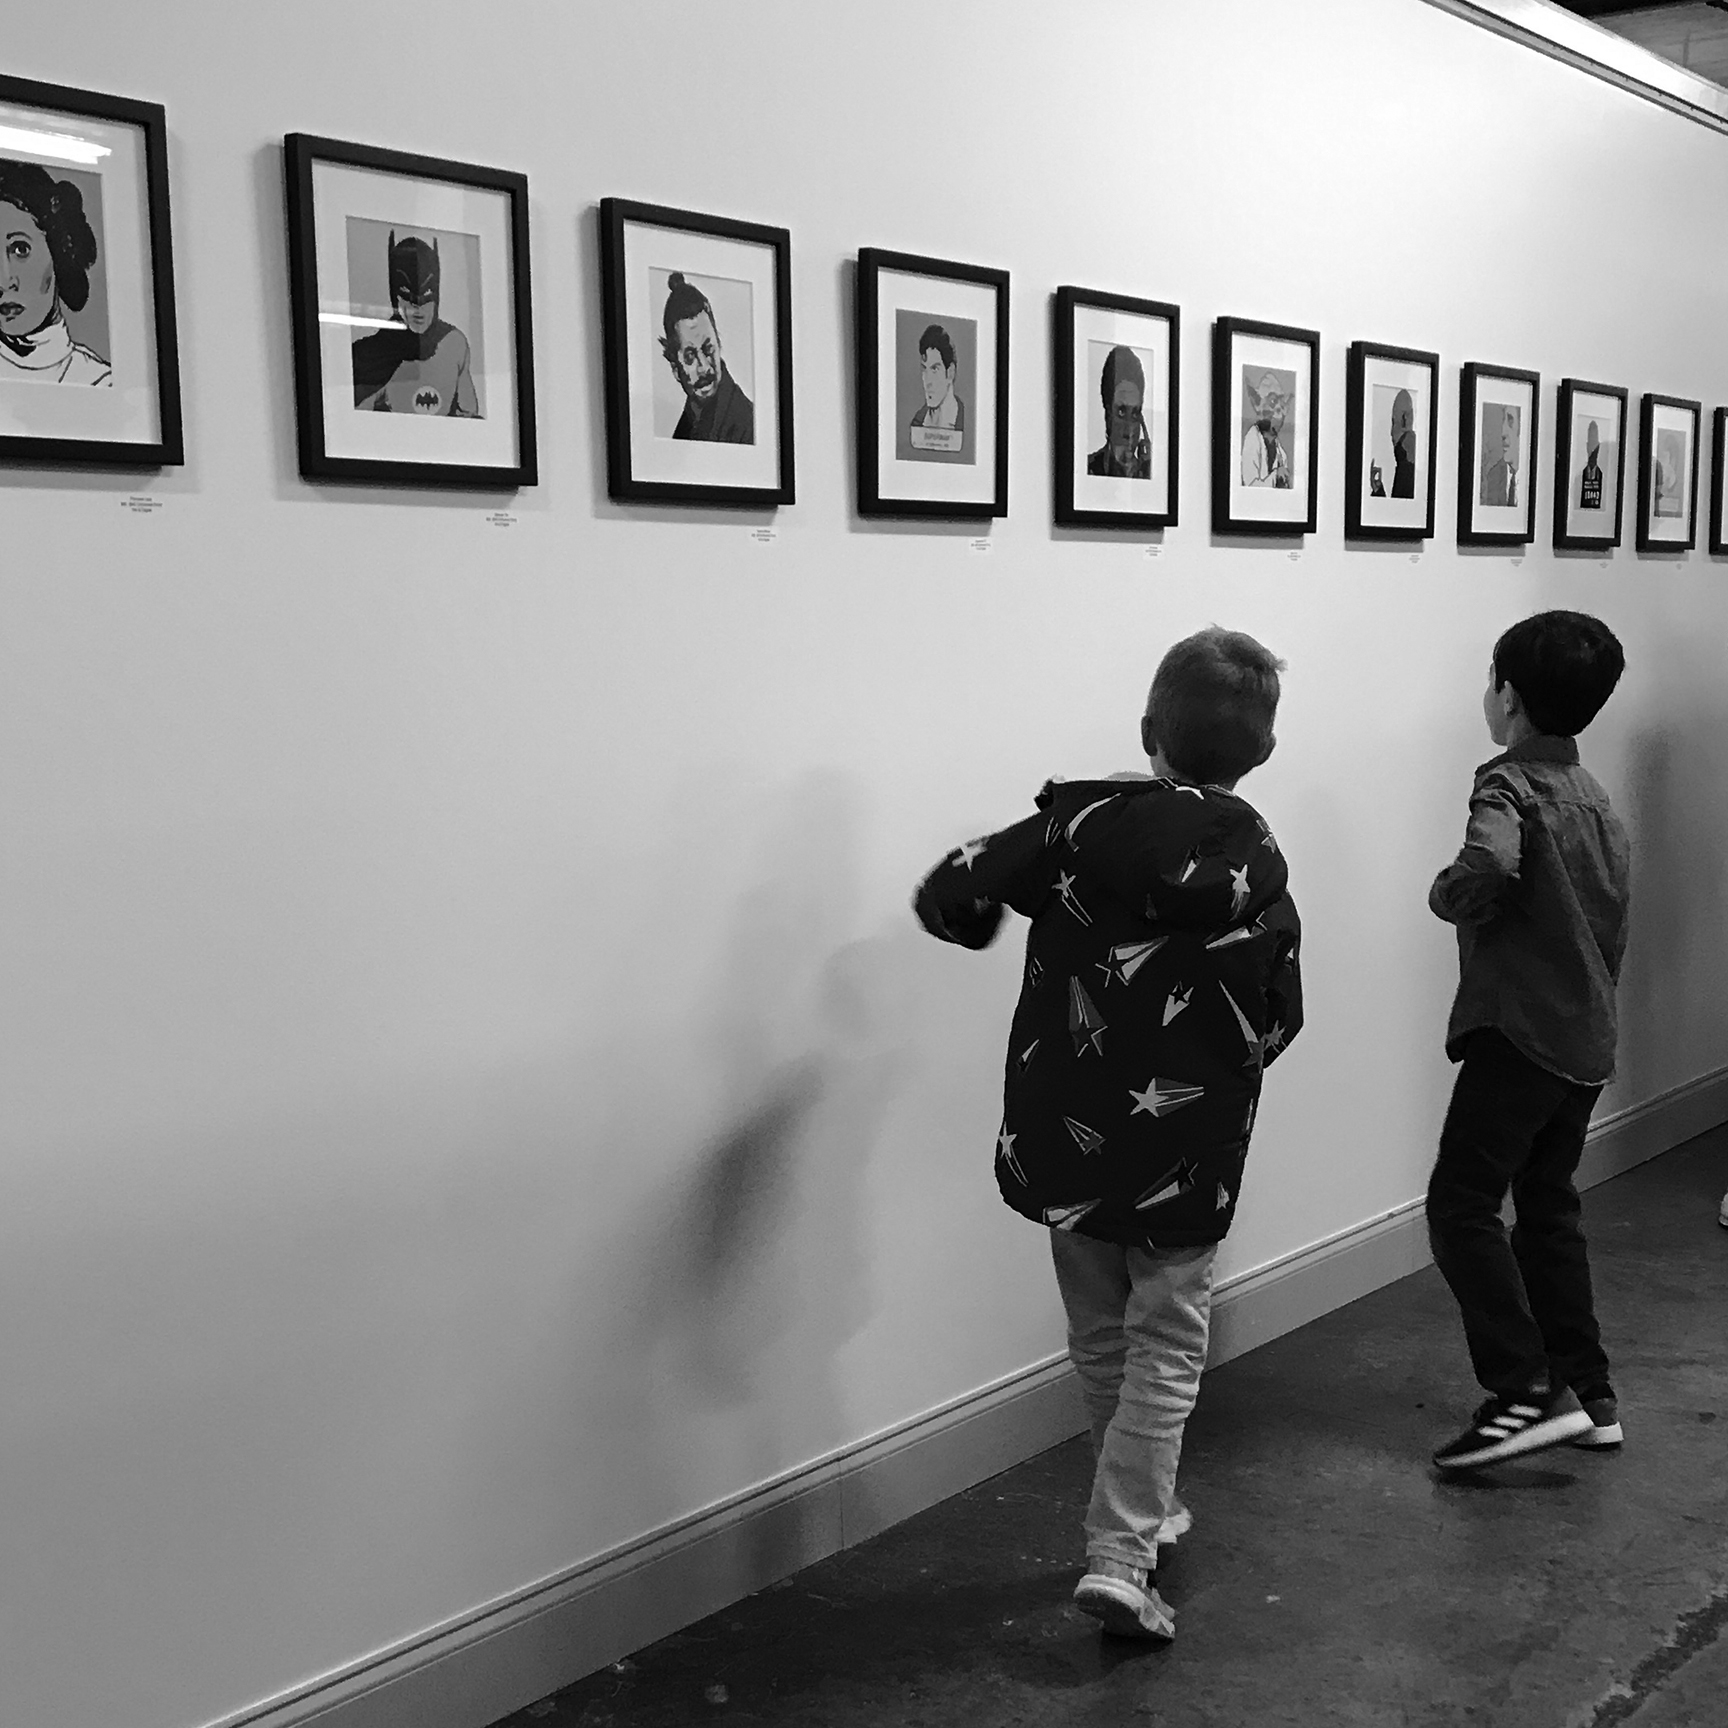 Young patrons observing art